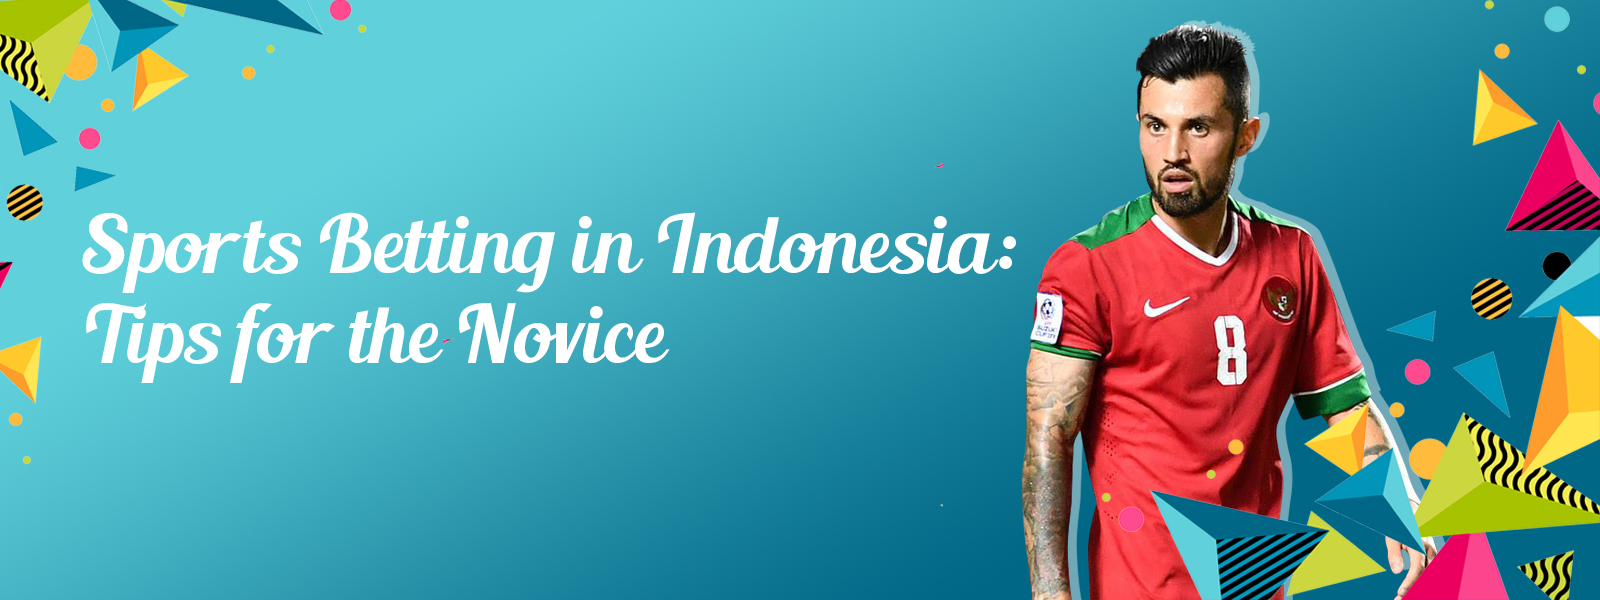 Sports Betting in Indonesia: Tips for the Novice